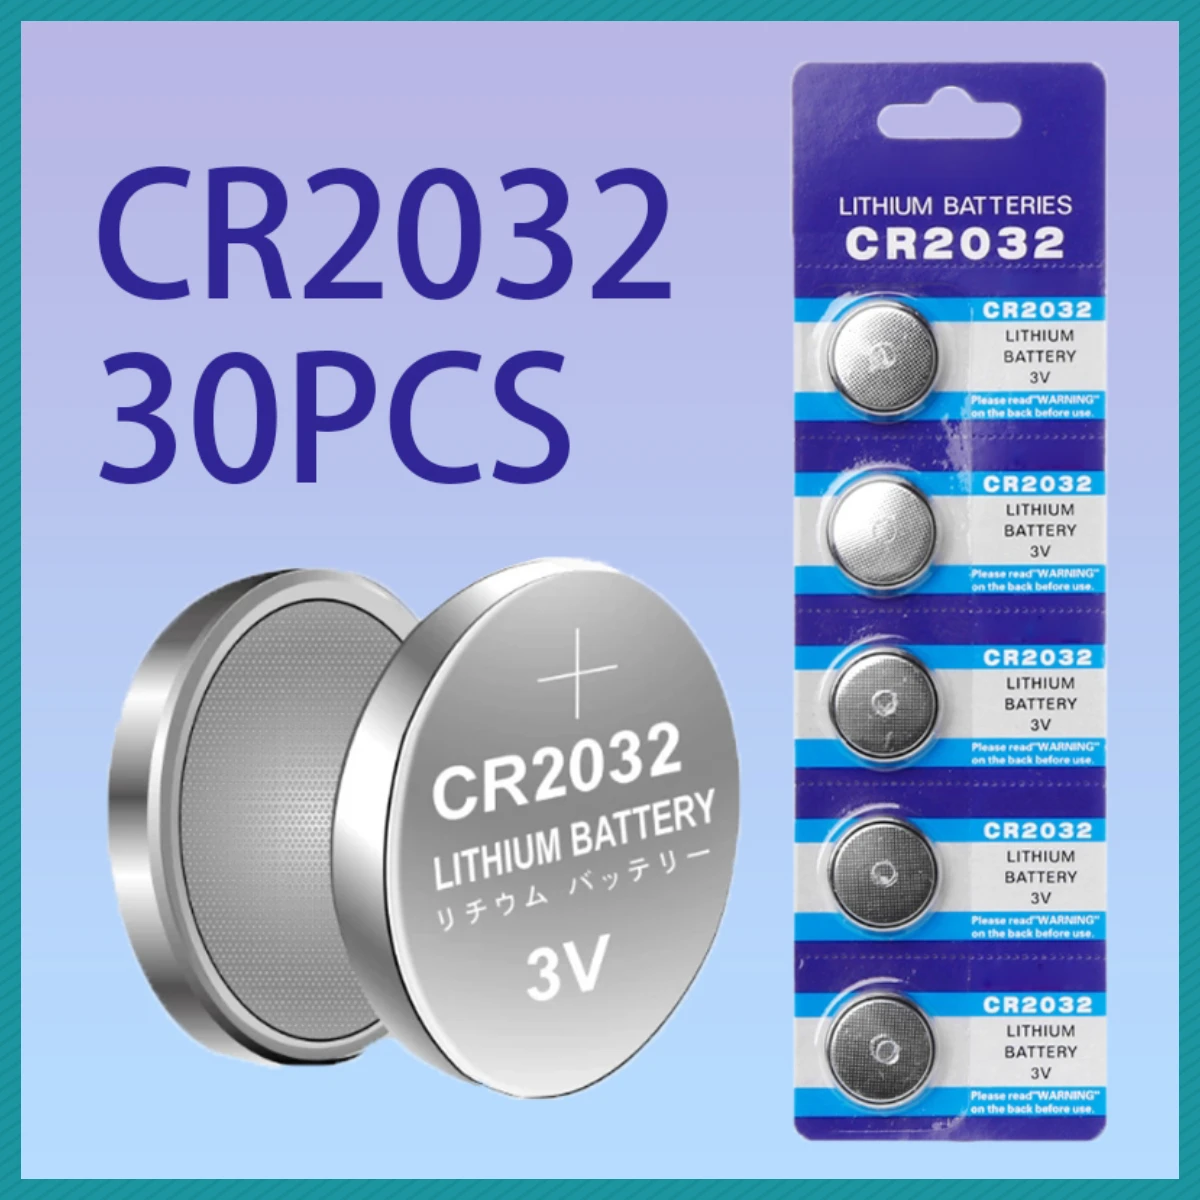 

CR2032 3V Lithuim Cell Button BR2032 DL2032 ECR2032 Li-ion Batteries CR 2032 Cell Electronic Watch Car Coin Batteries Control